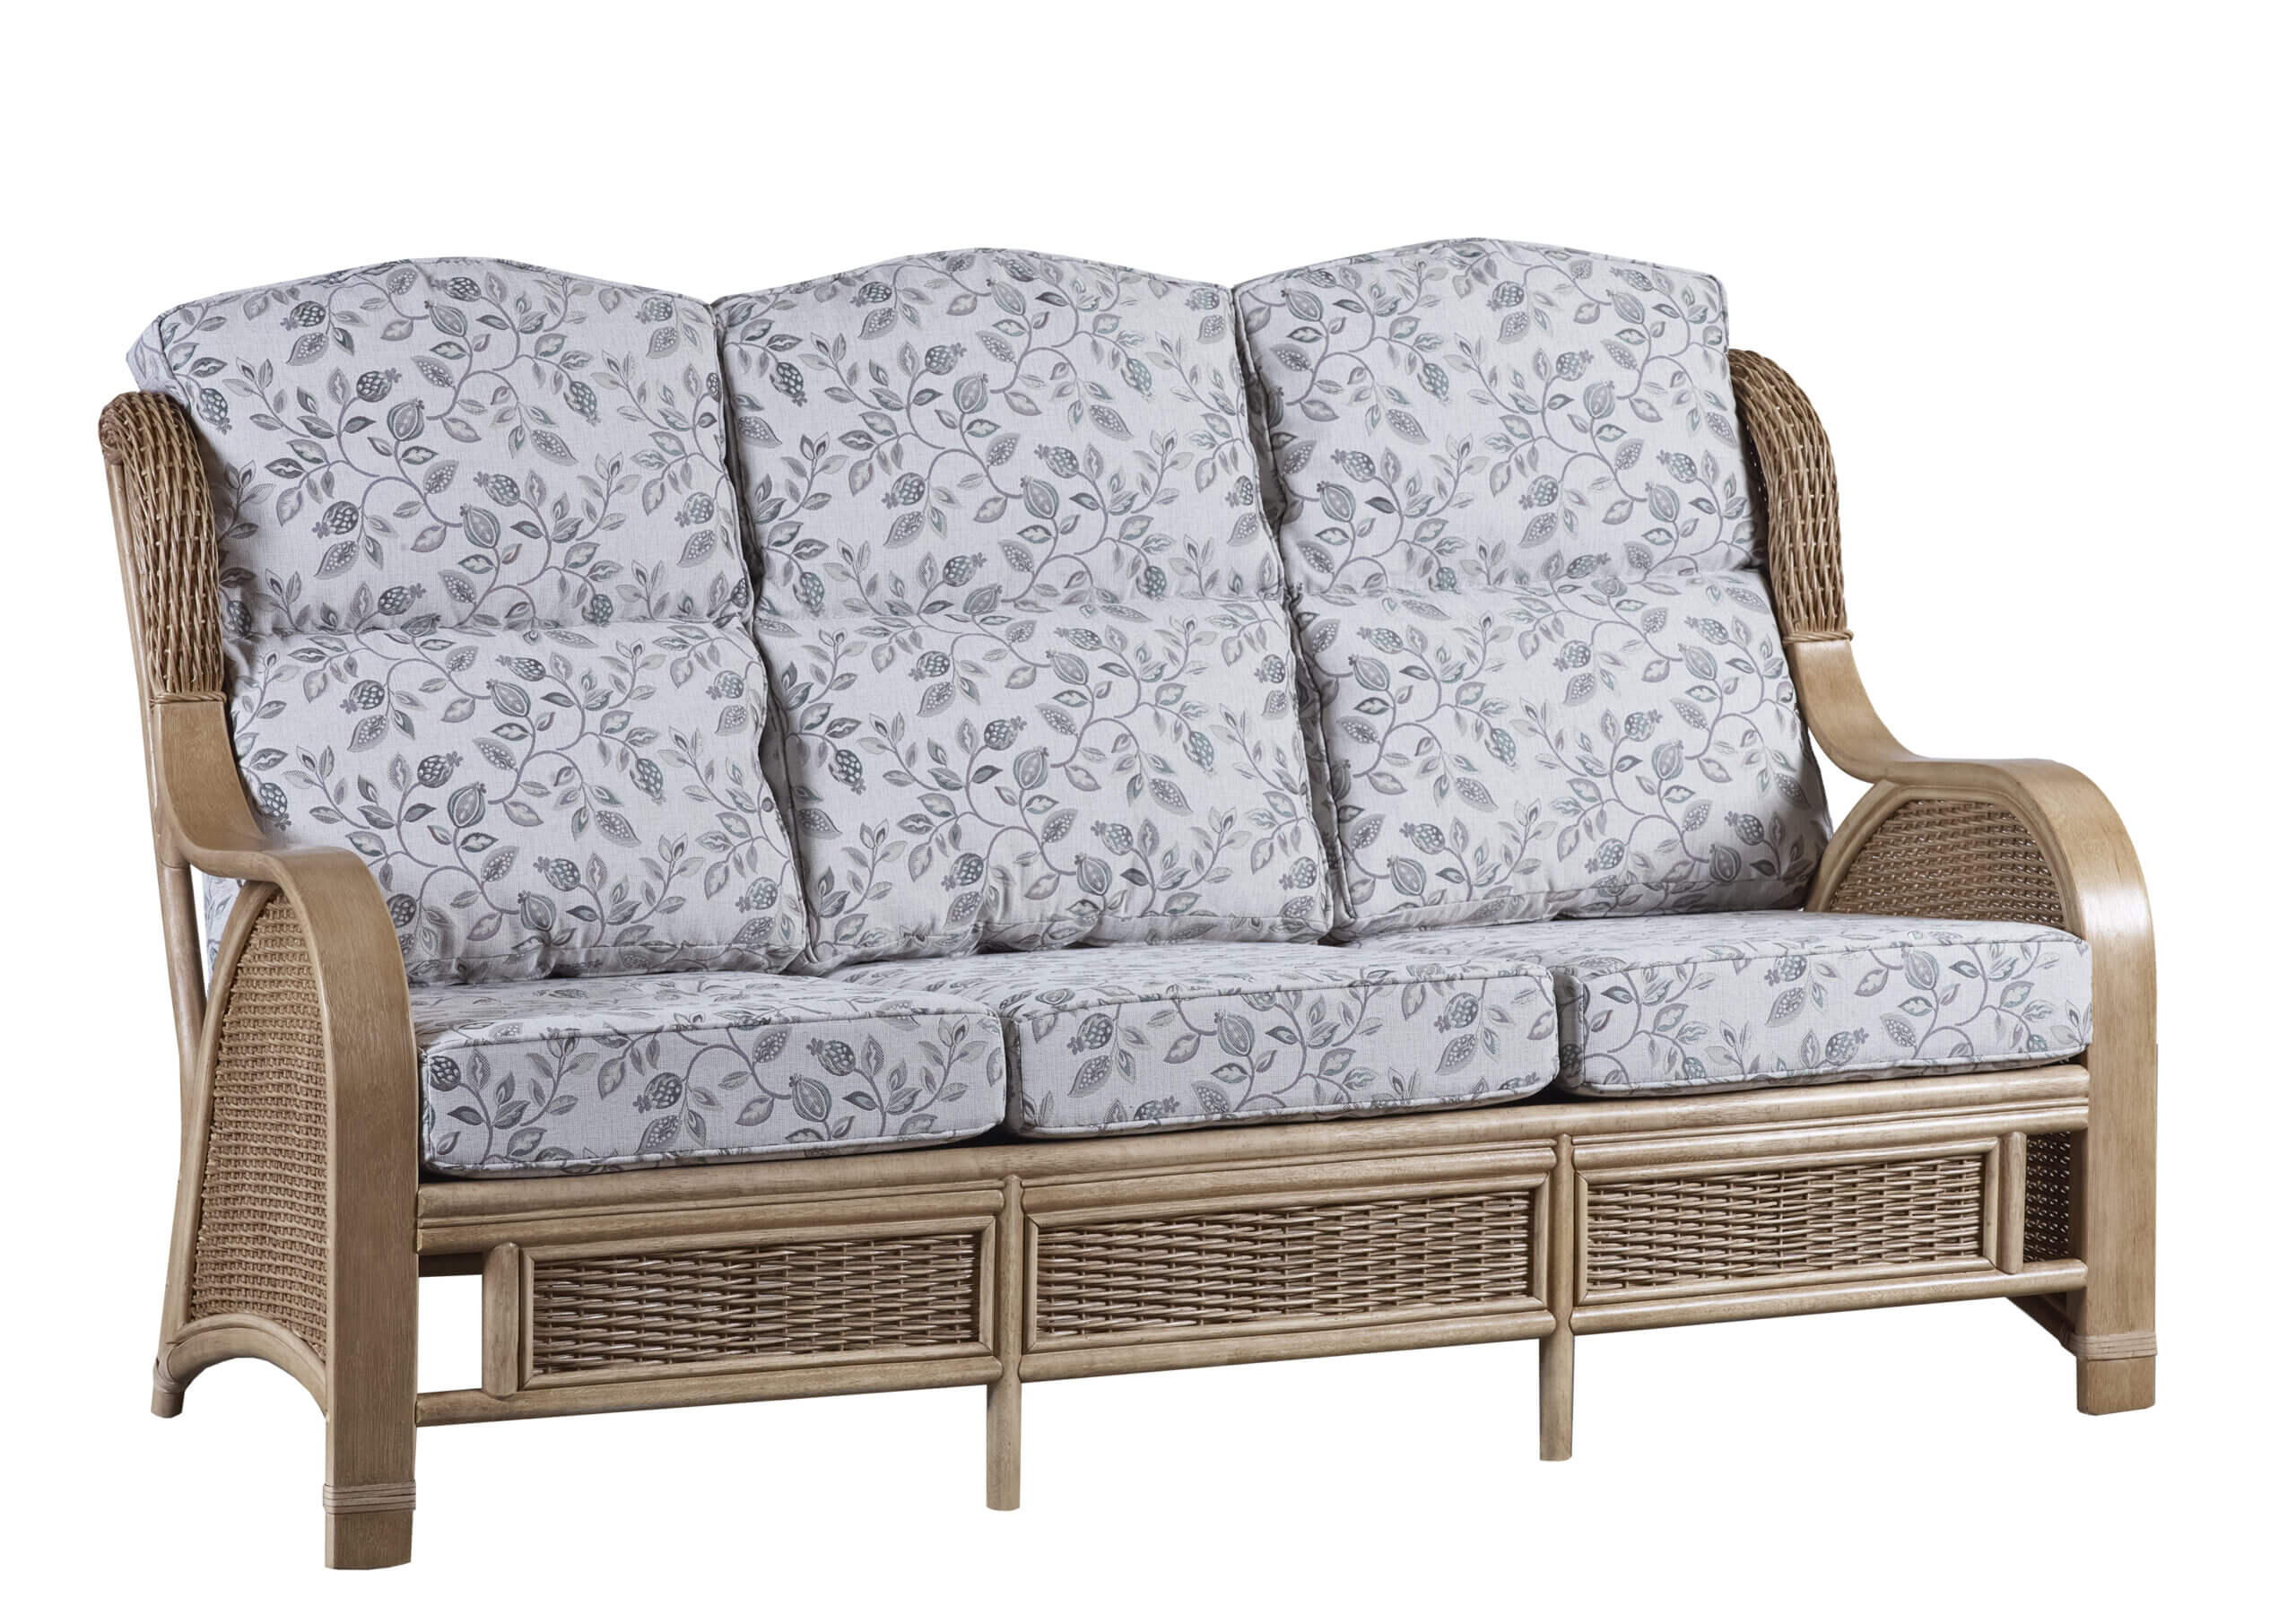 Showing image for Bari 3-seater sofa